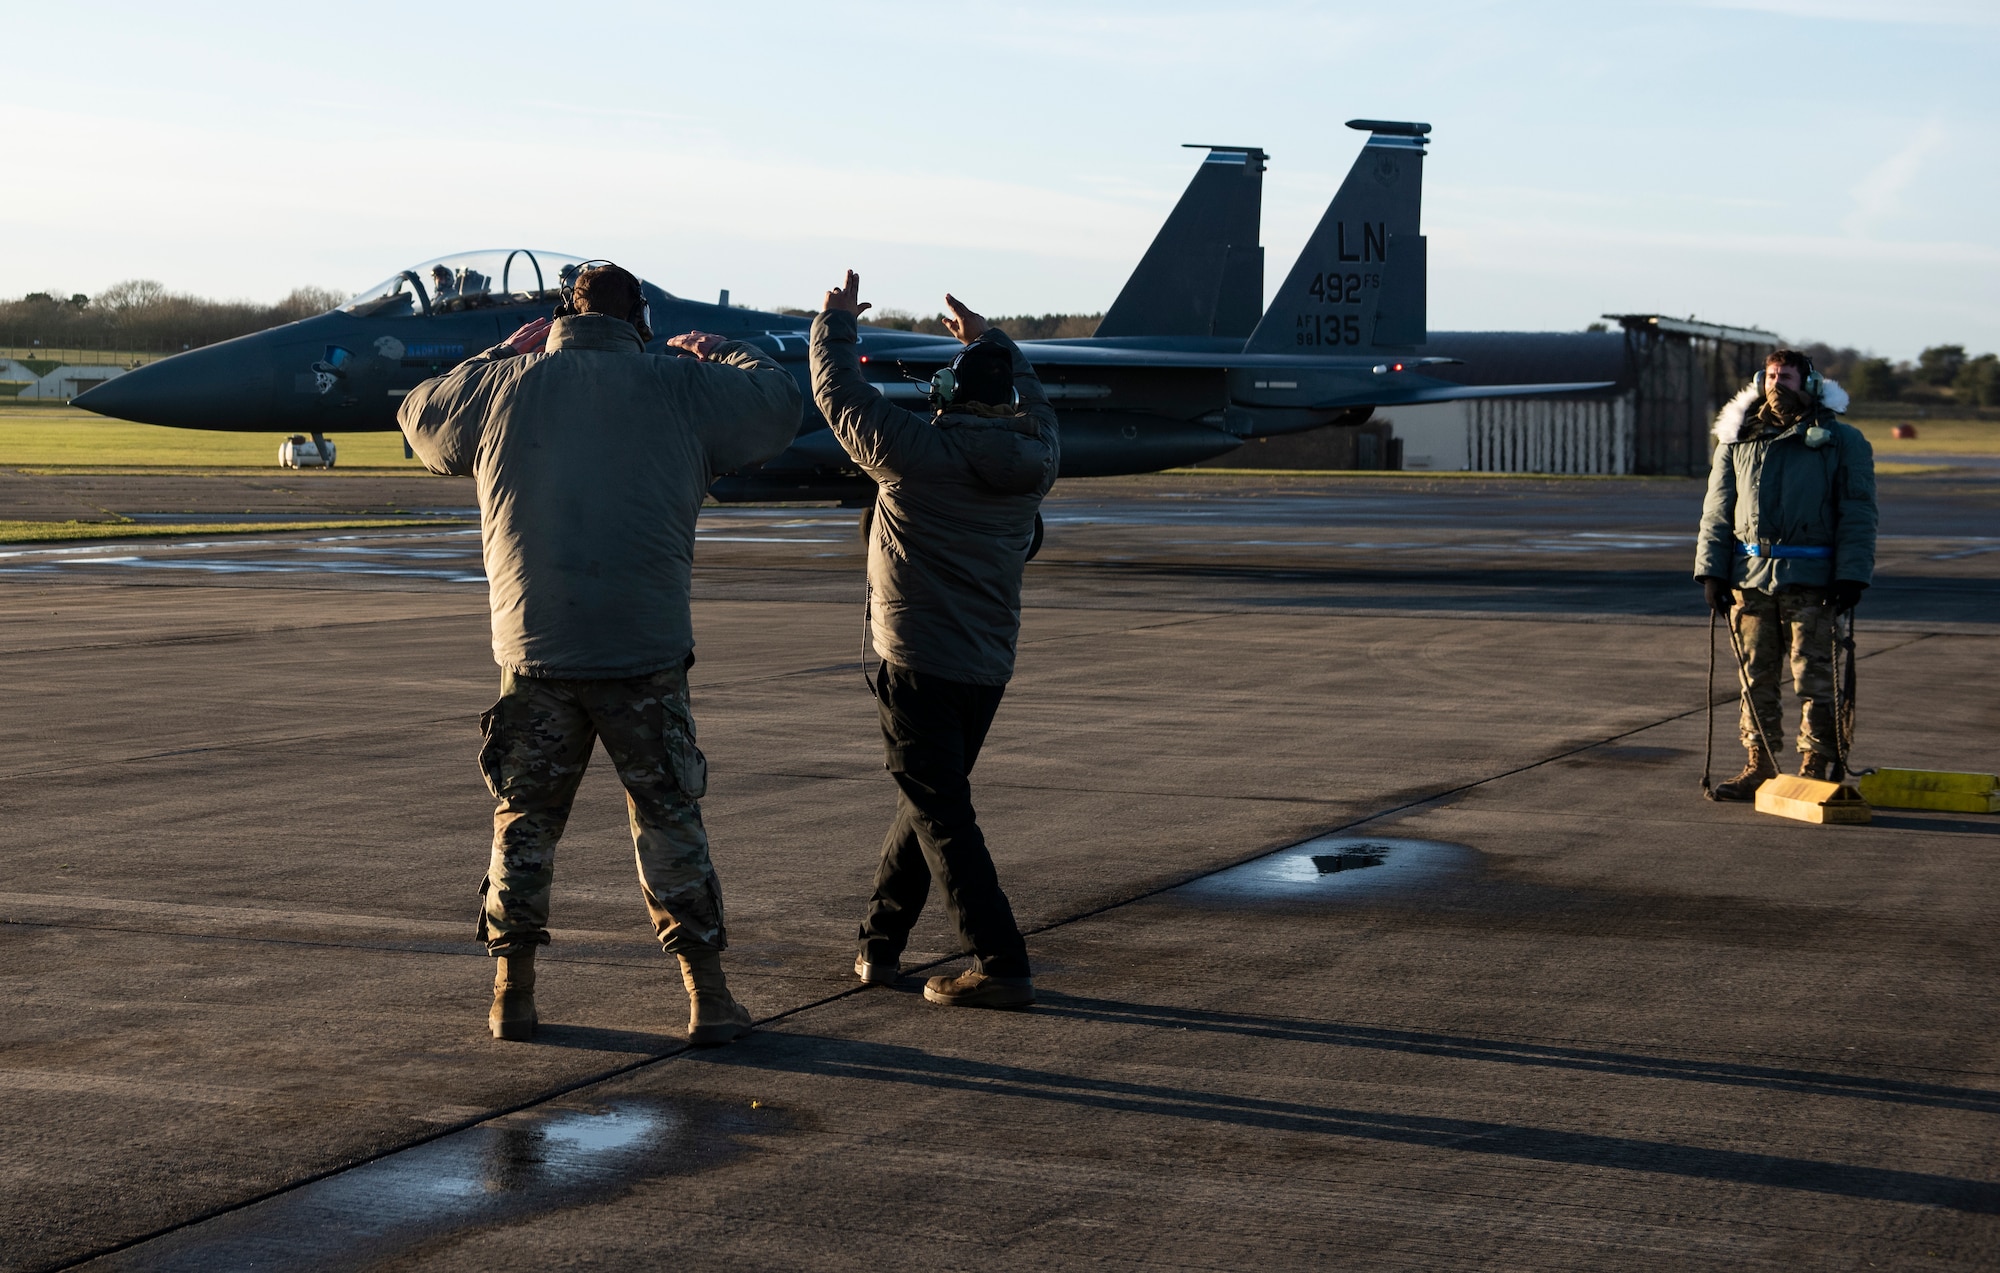 U.S. Air Force Airmen from the 48th Aircraft Maintenance Squadron direct an F-15E Strike Eagle onto the apron during Agile Combat Employment training at Royal Air Force Lakenheath, England, Jan. 12, 2021. Agile Combat Employment capabilities ensure U.S. Air Forces in Europe, along with allies and partners, are ready for potential last minute contingencies by allowing forces to operate from locations with varying levels of capacity and support. (U.S. Air Force photo by Airman 1st Class Jessi Monte)